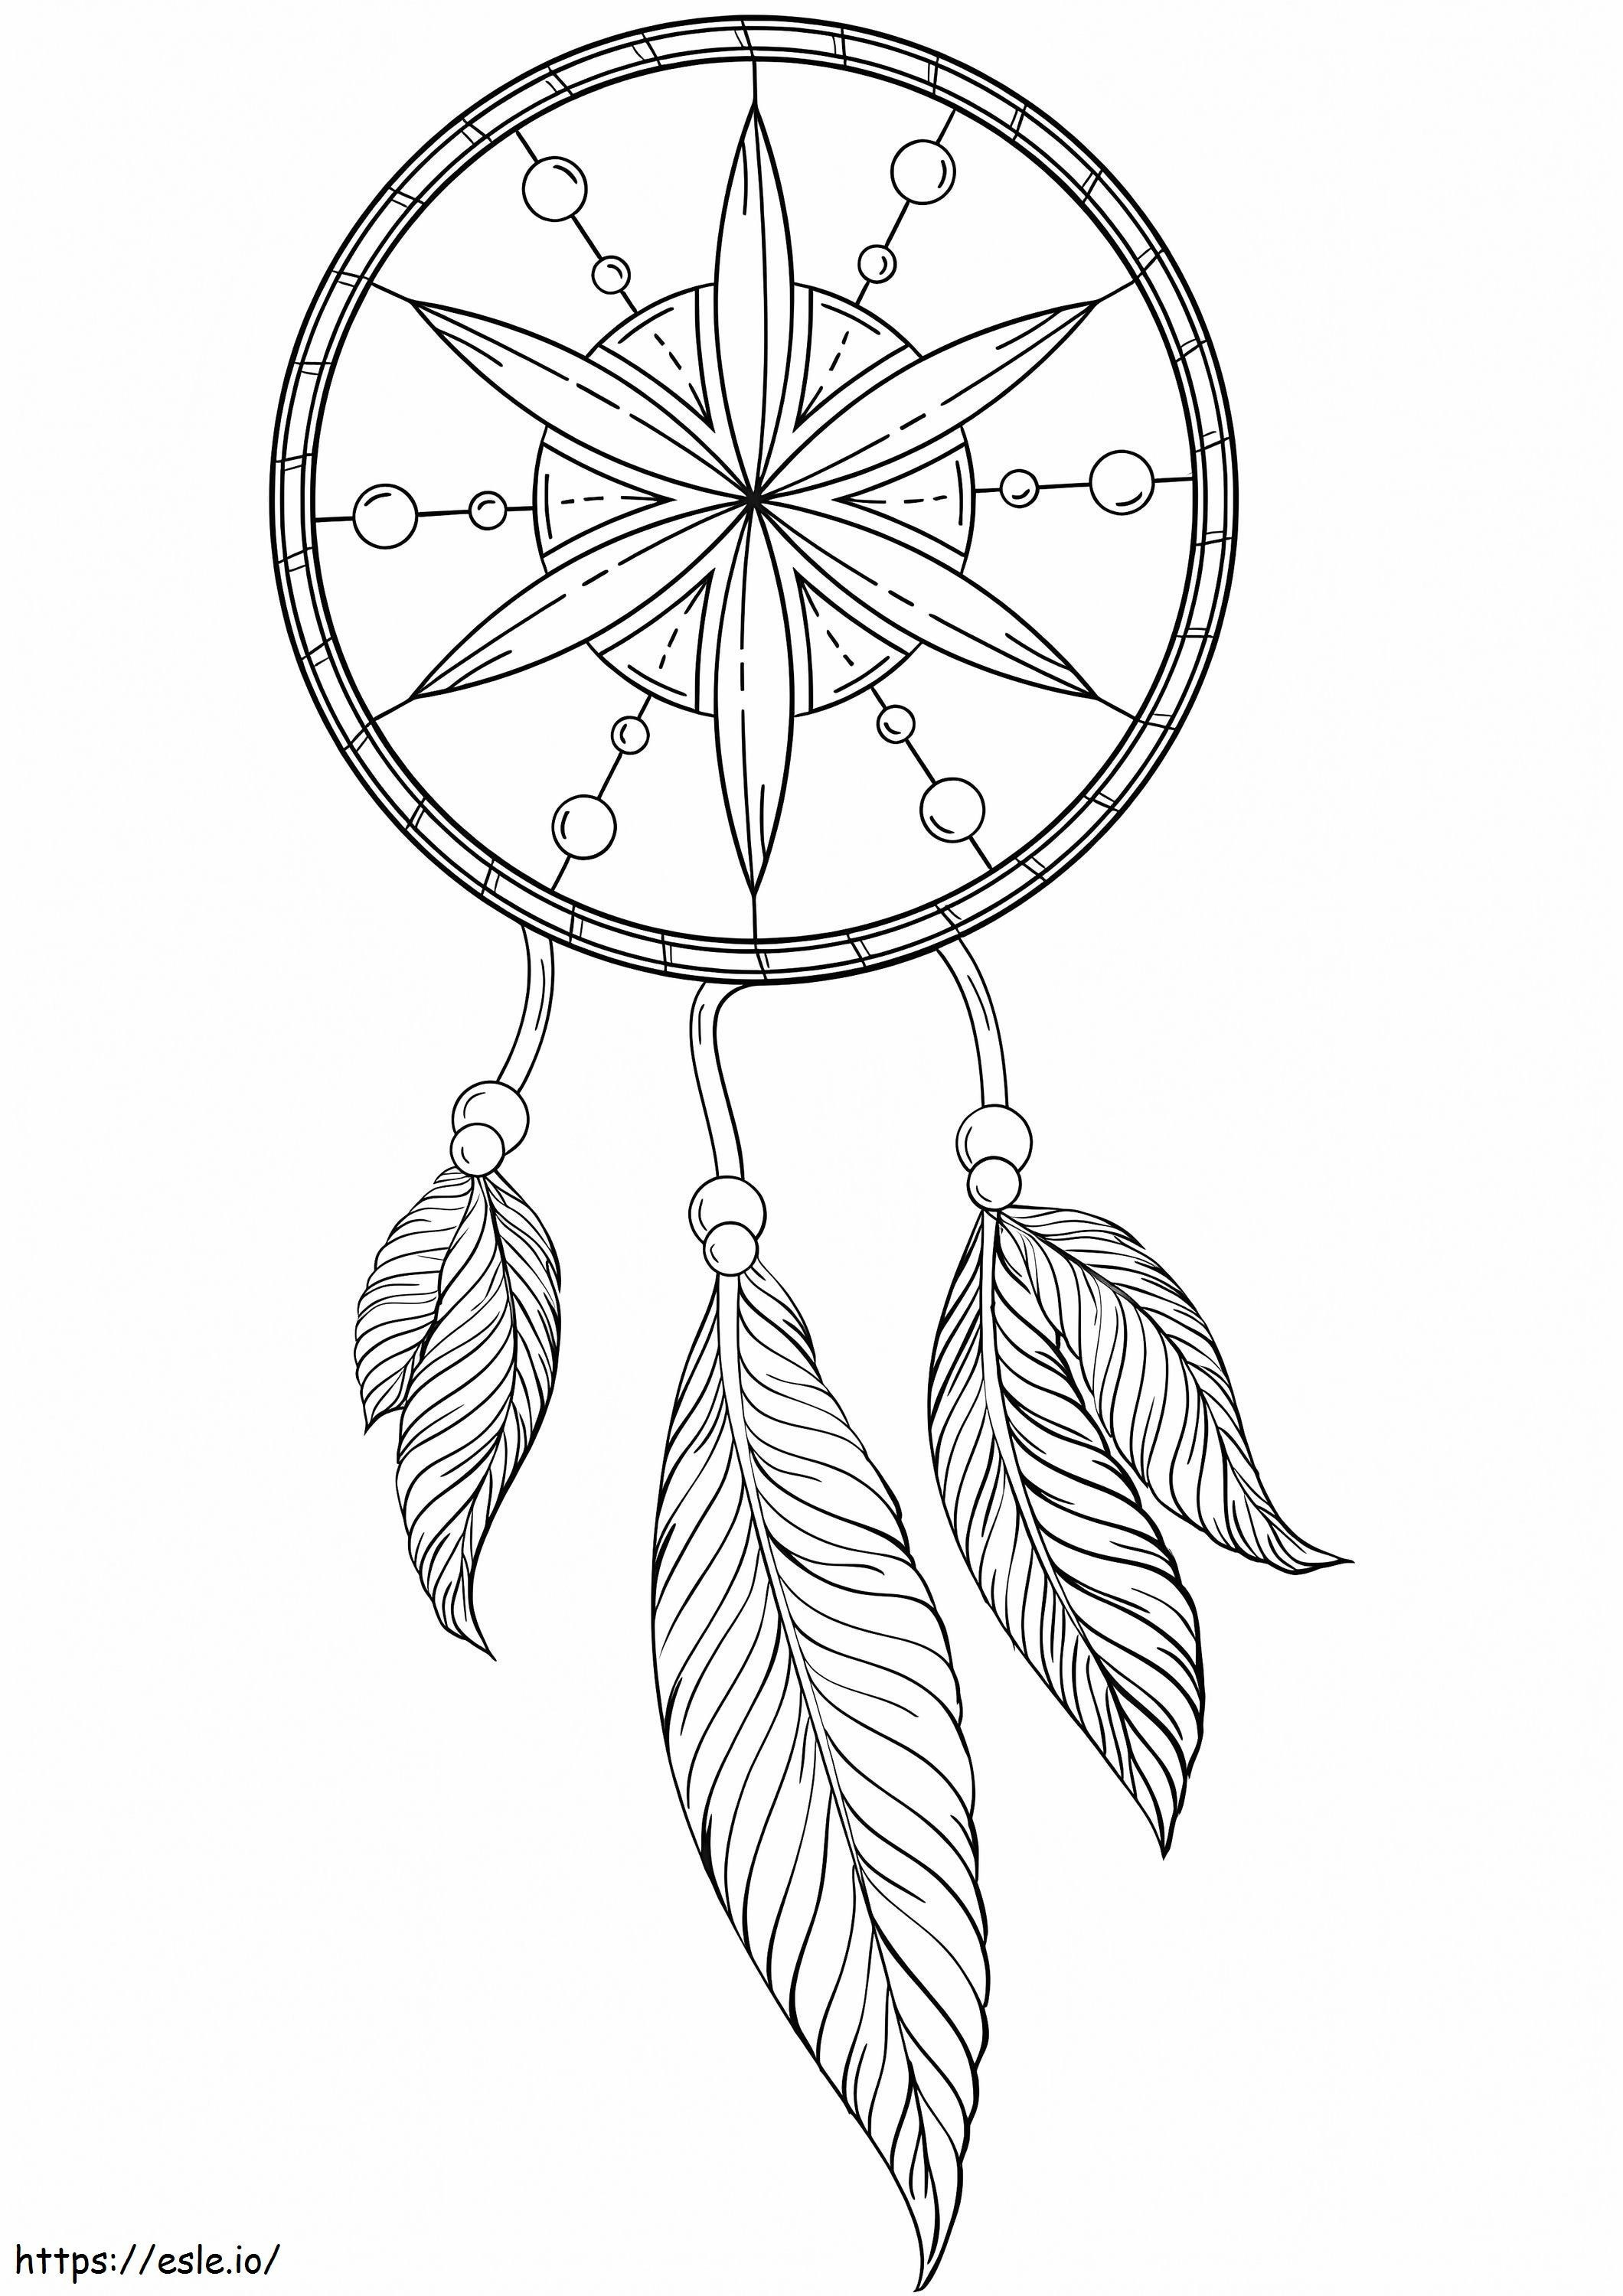 Native American Dreamcatcher 1 coloring page